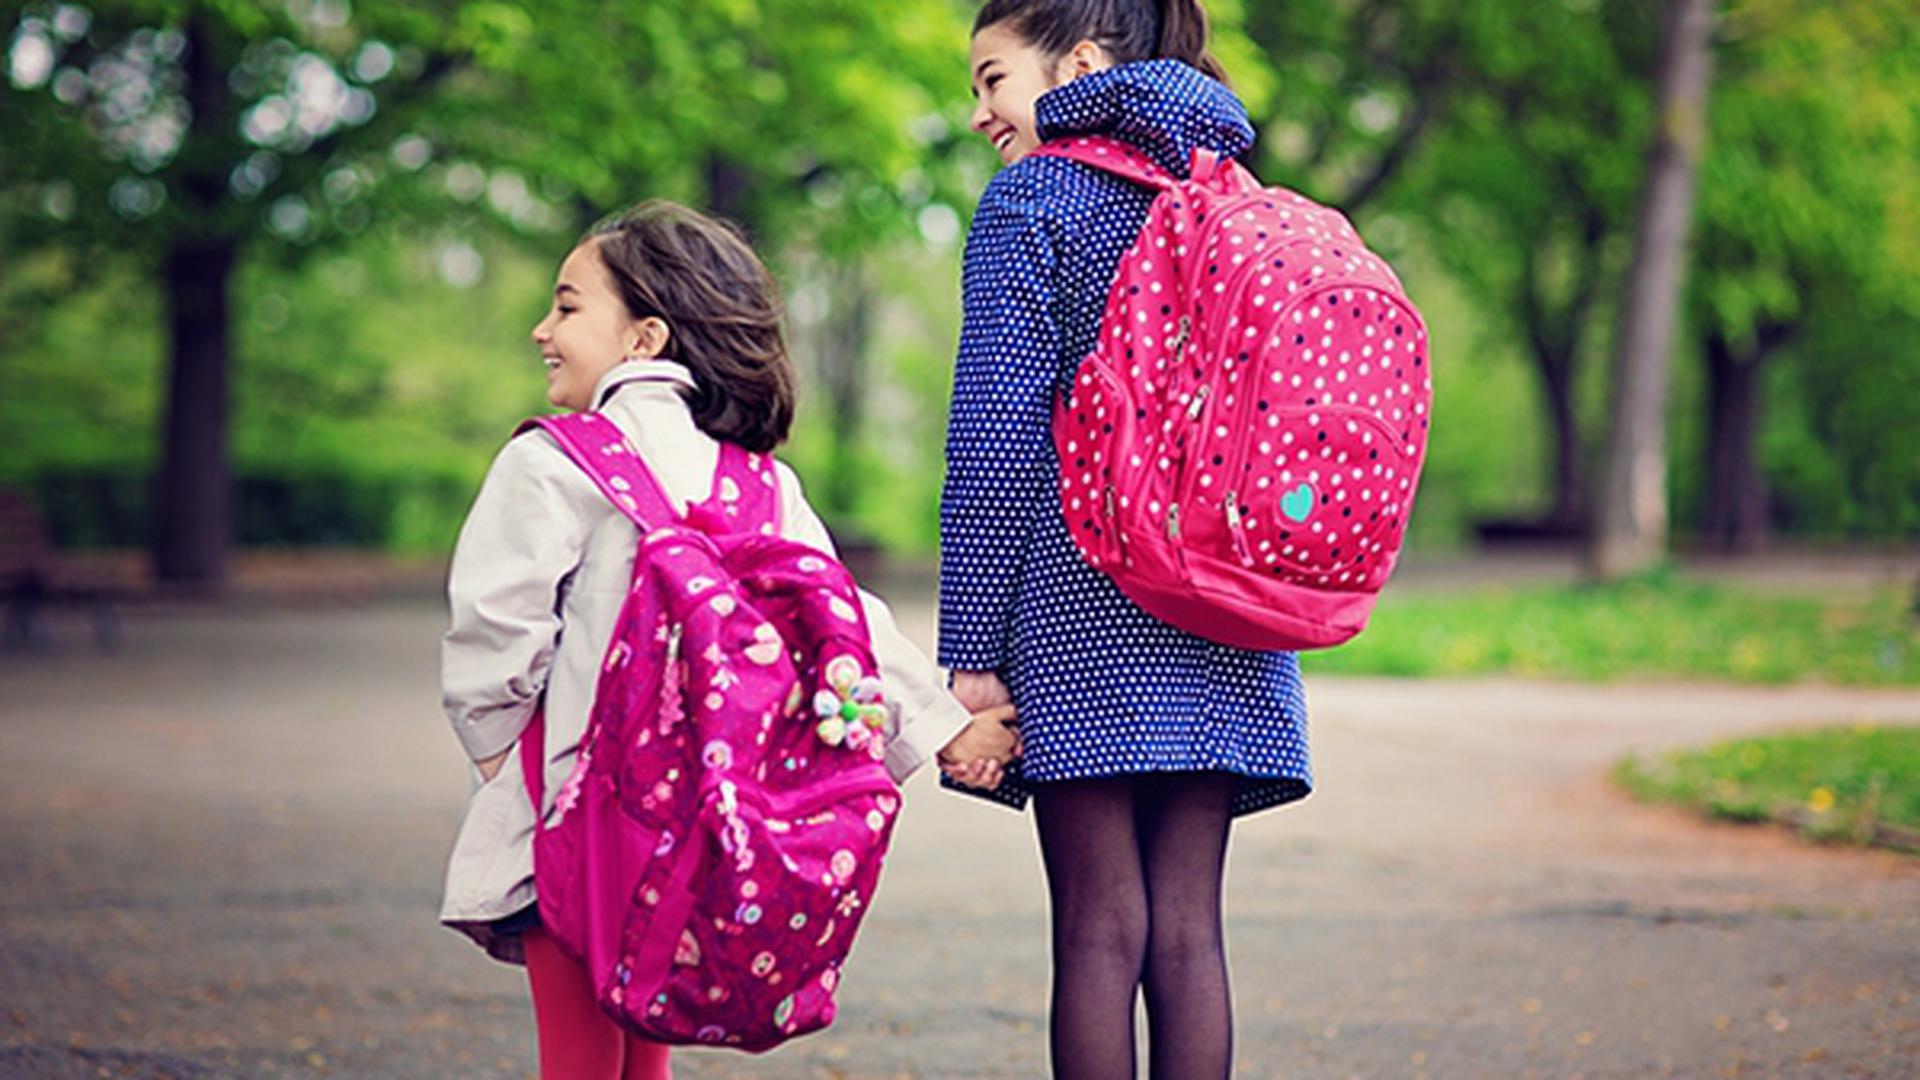 Two sisters are going to the school pass throught the local park.